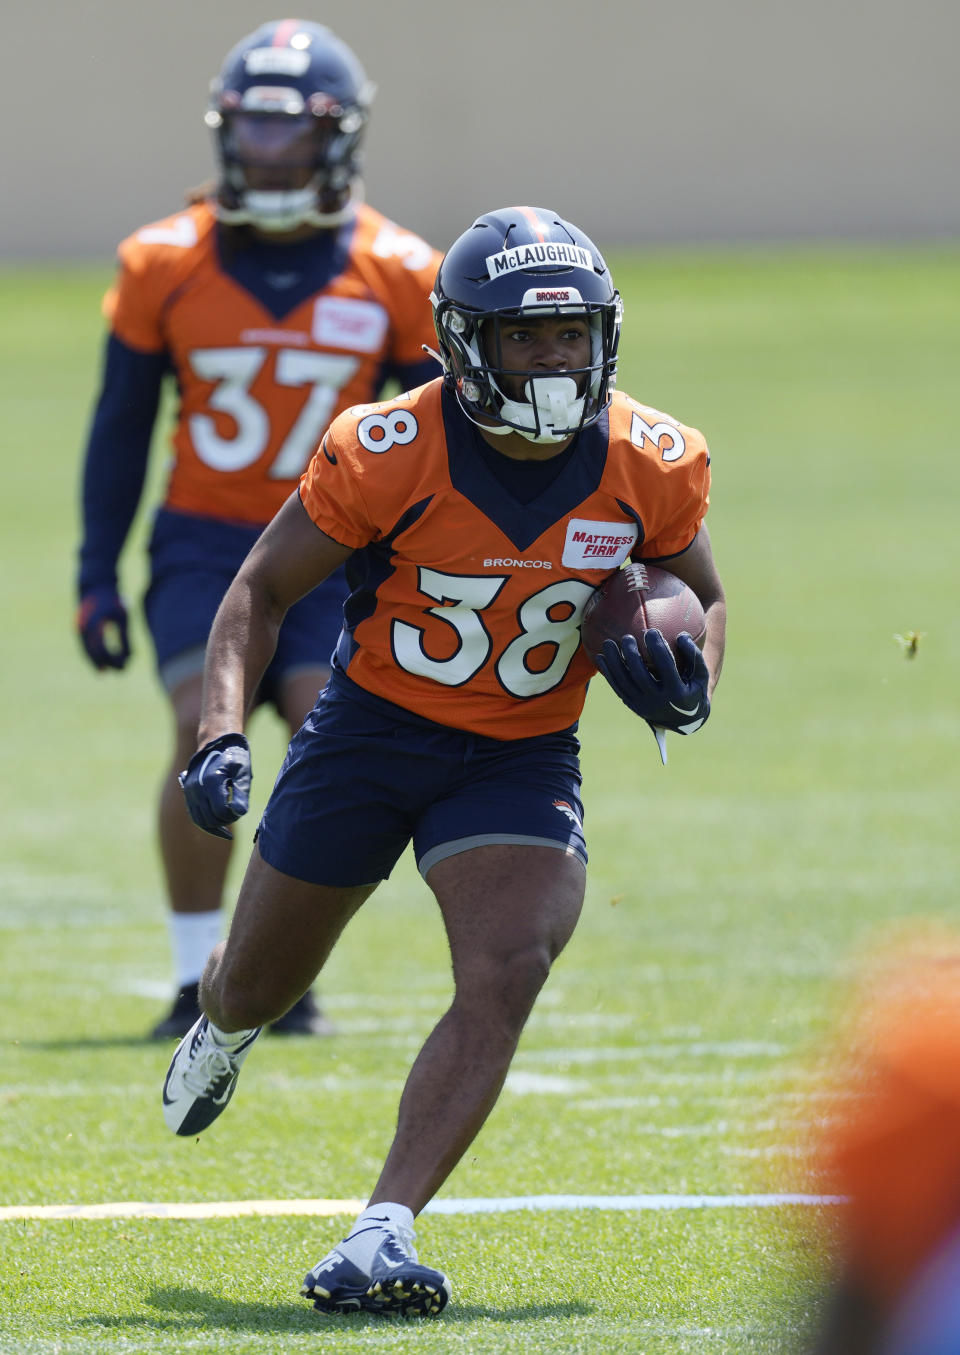 Denver Broncos running back Jaleel McLaughlin takes part in drills during NFL football practice, Wednesday, June 14, 2023, in Centennial, Colo. (AP Photo/David Zalubowski)